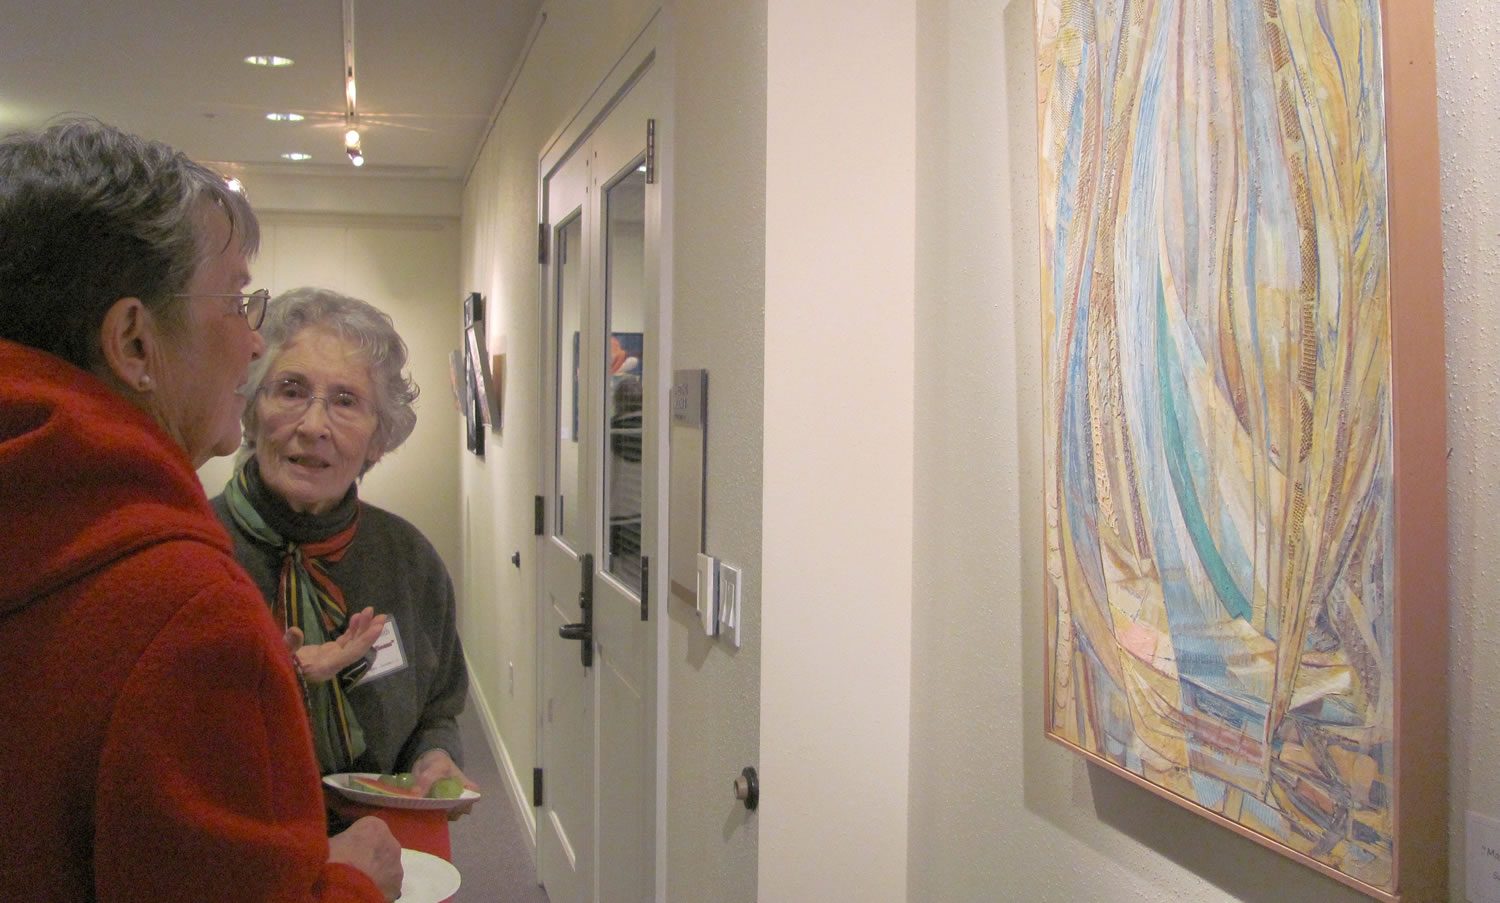 Susan Smith, right, discusses her artwork with an attendee at a First Friday reception.